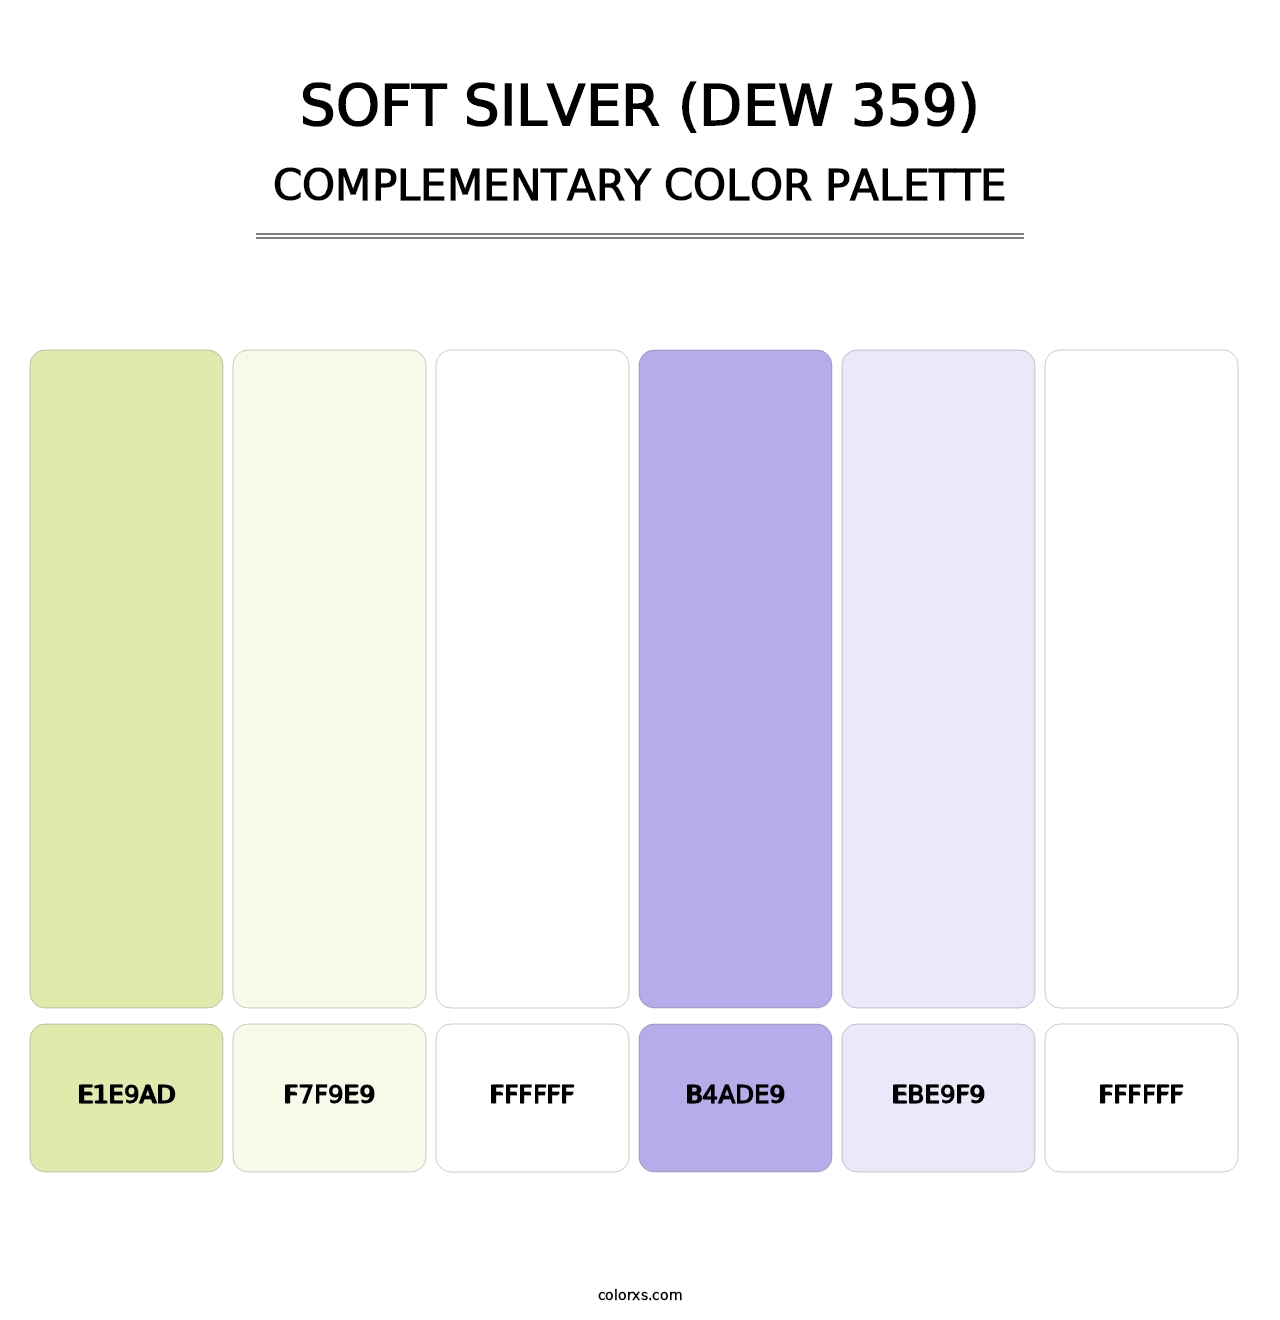 Soft Silver (DEW 359) - Complementary Color Palette